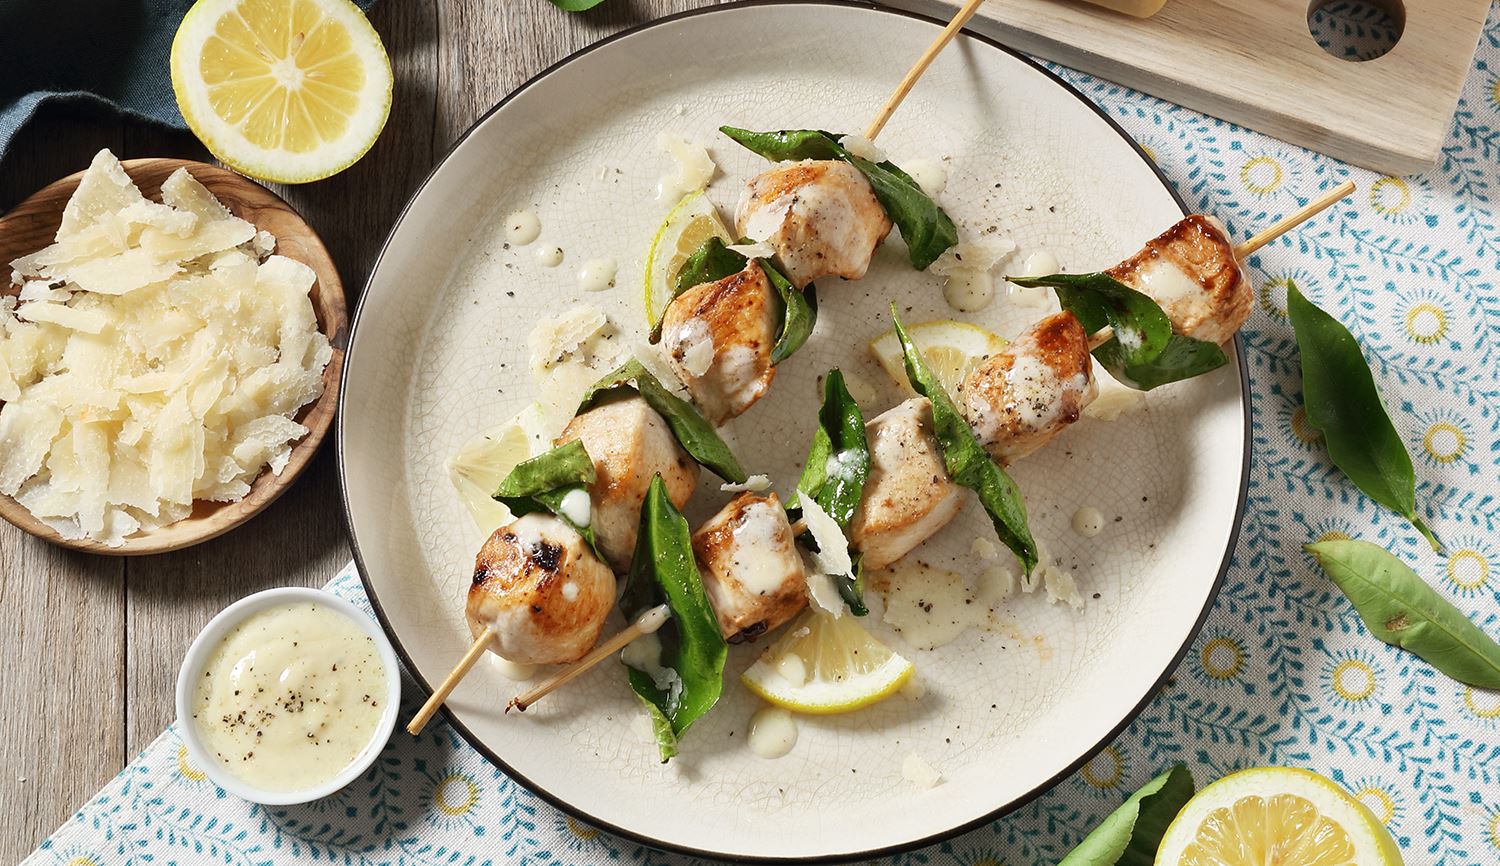 Grilled Chicken Skewers with Lemon Leaves and Creamy Grana Padano Sauce